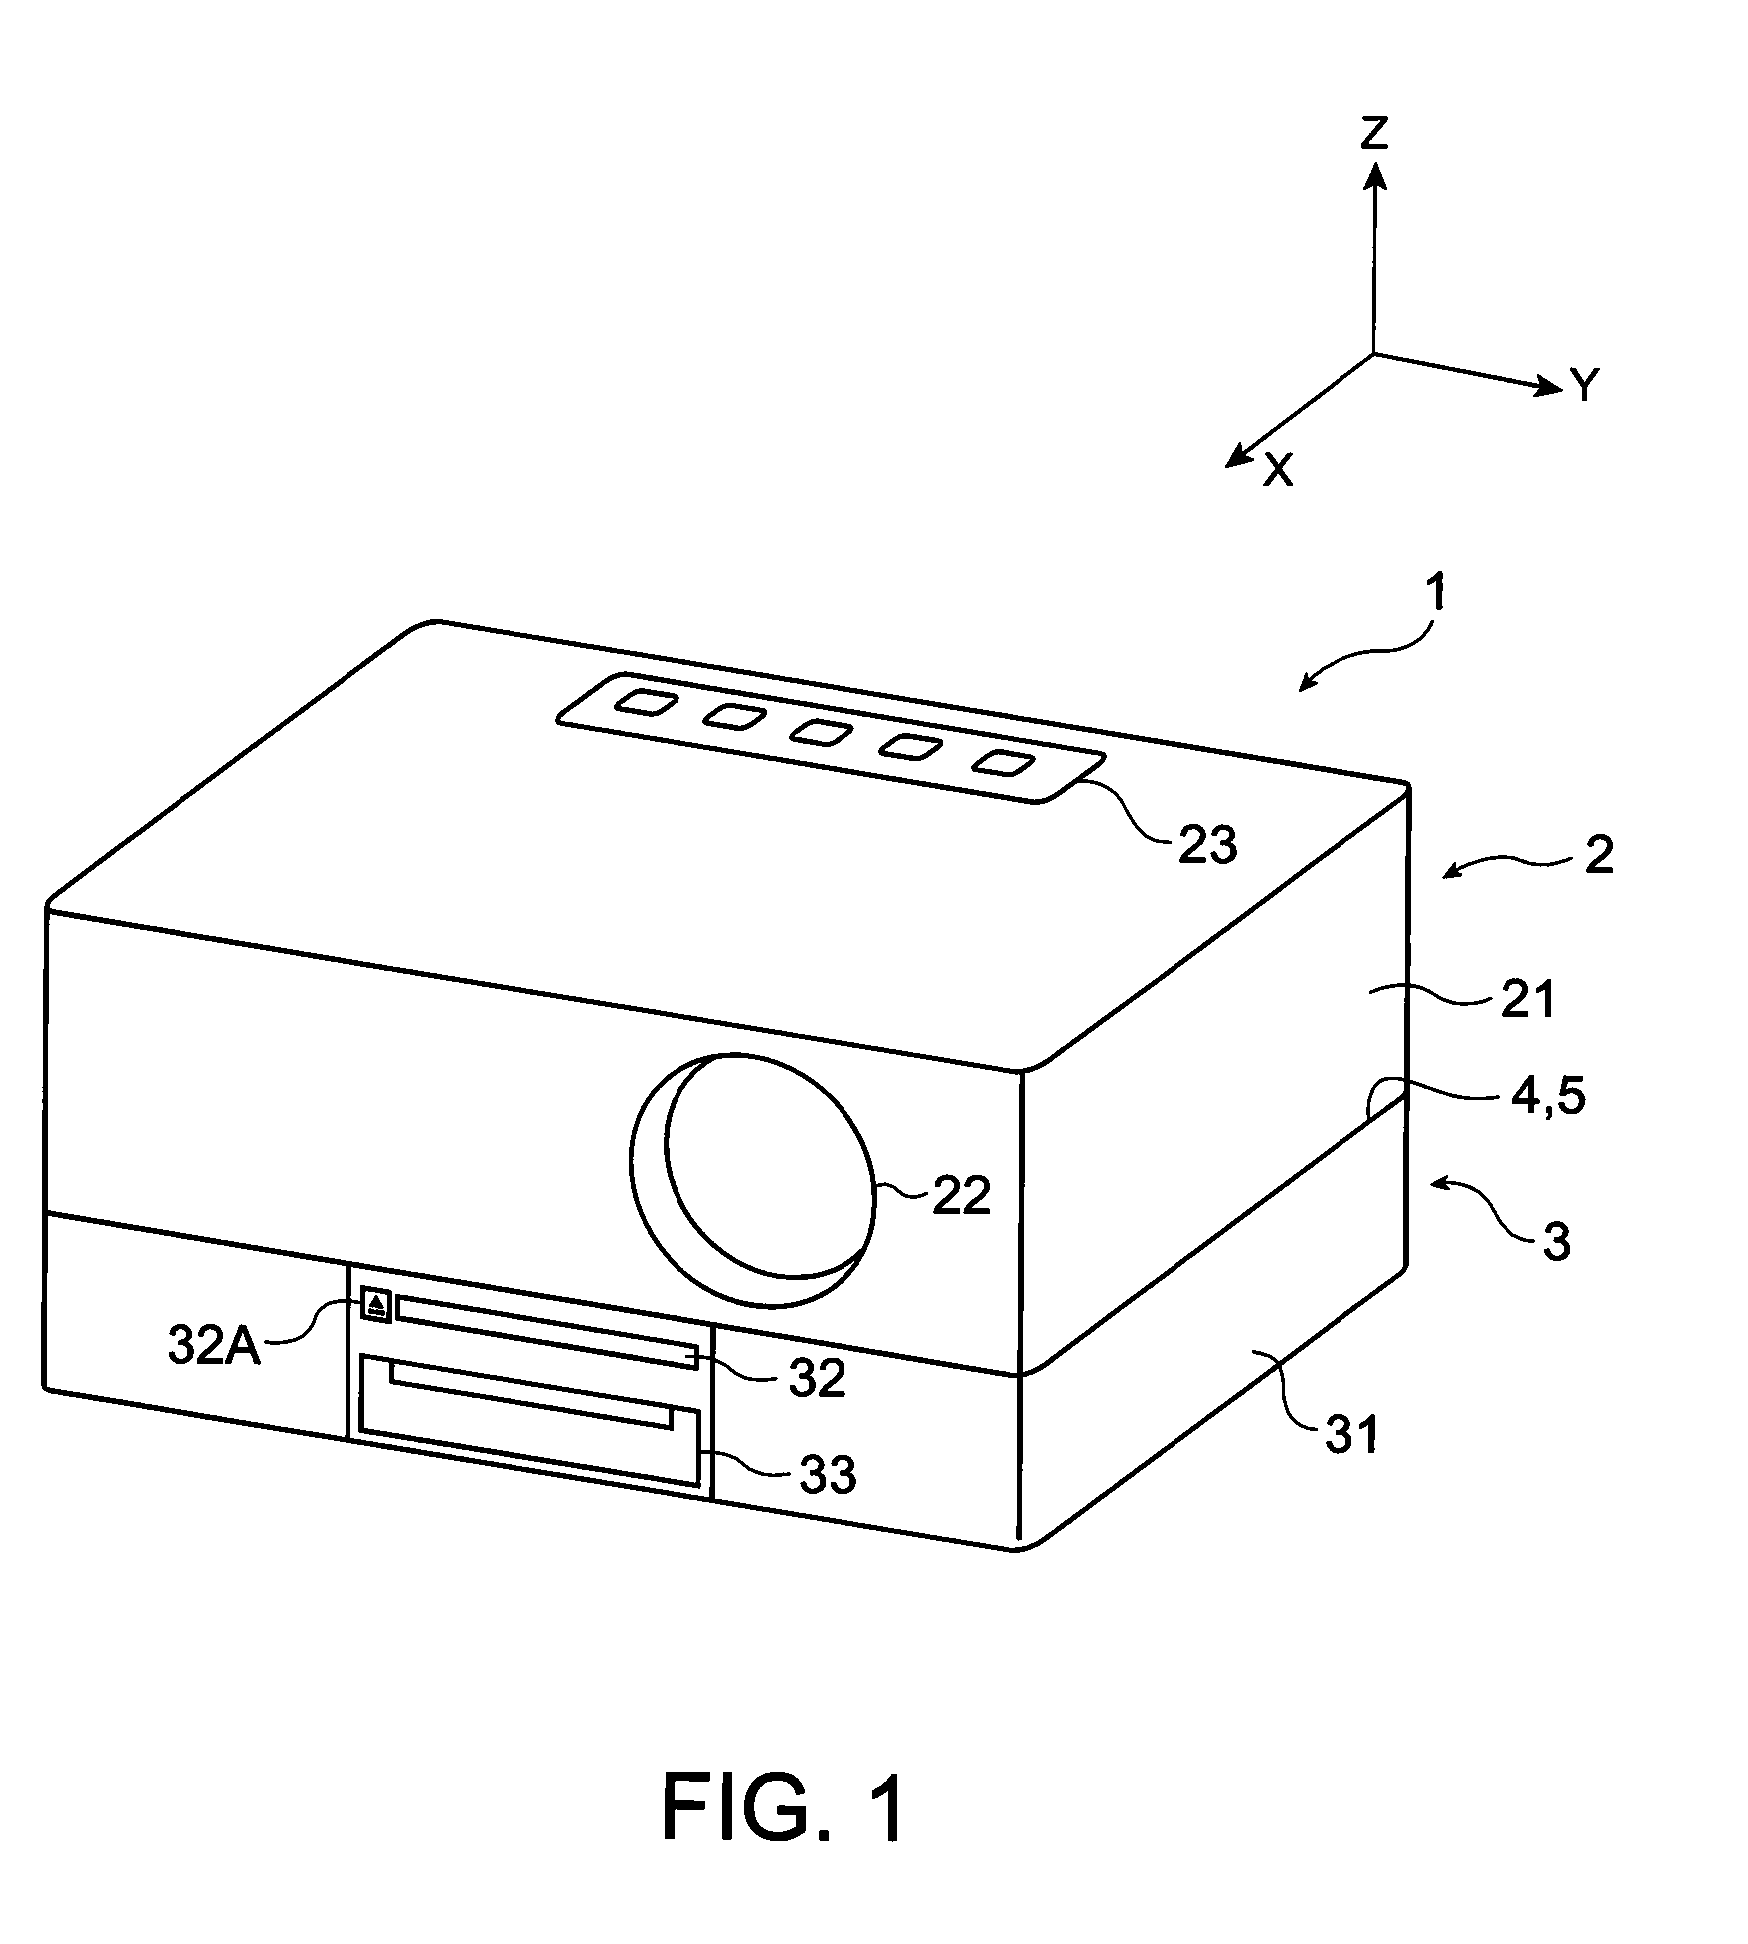 Projector including a connection mechanism rotatably connecting a projector main body to an image output device